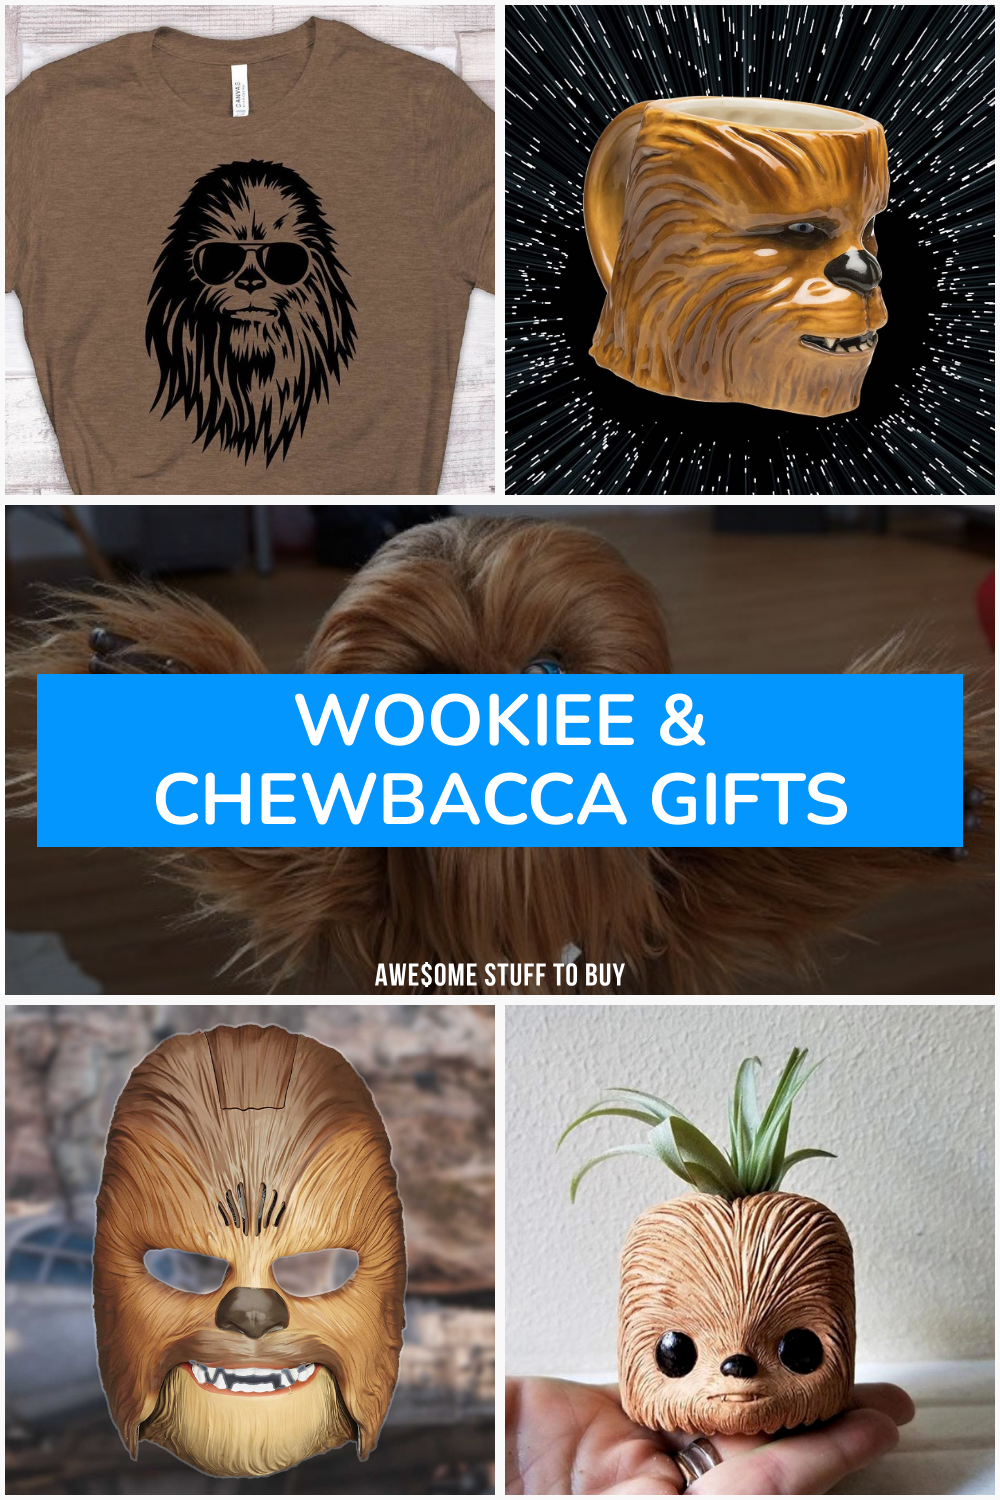 Chewbacca Gifts // Awesome Stuff to Buy